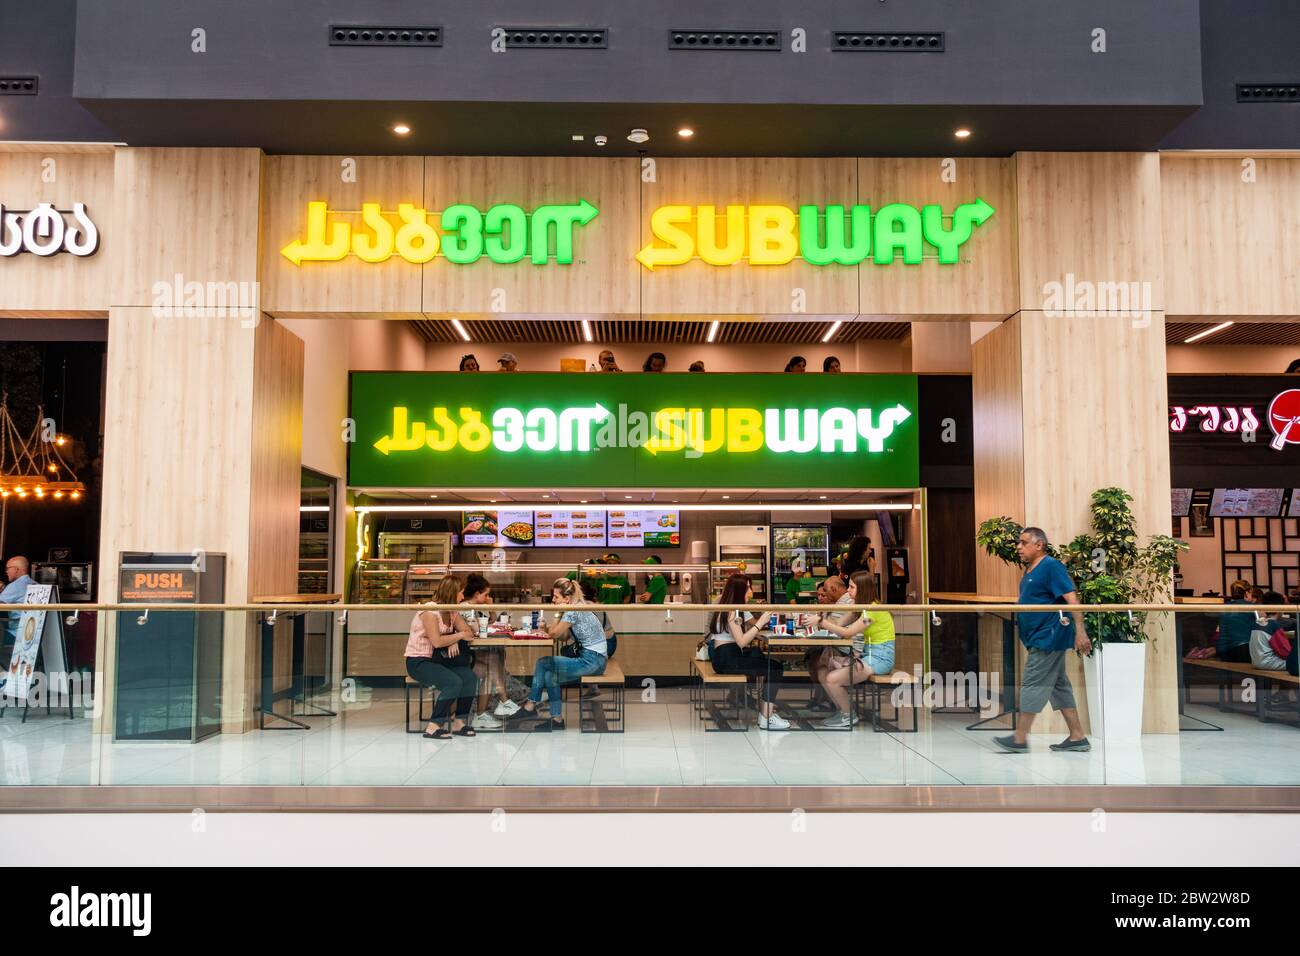 A Subway sandwich franchise in a shopping mall in Tbilisi, Georgia, replete with the Subway logo converted to Georgian script Stock Photo